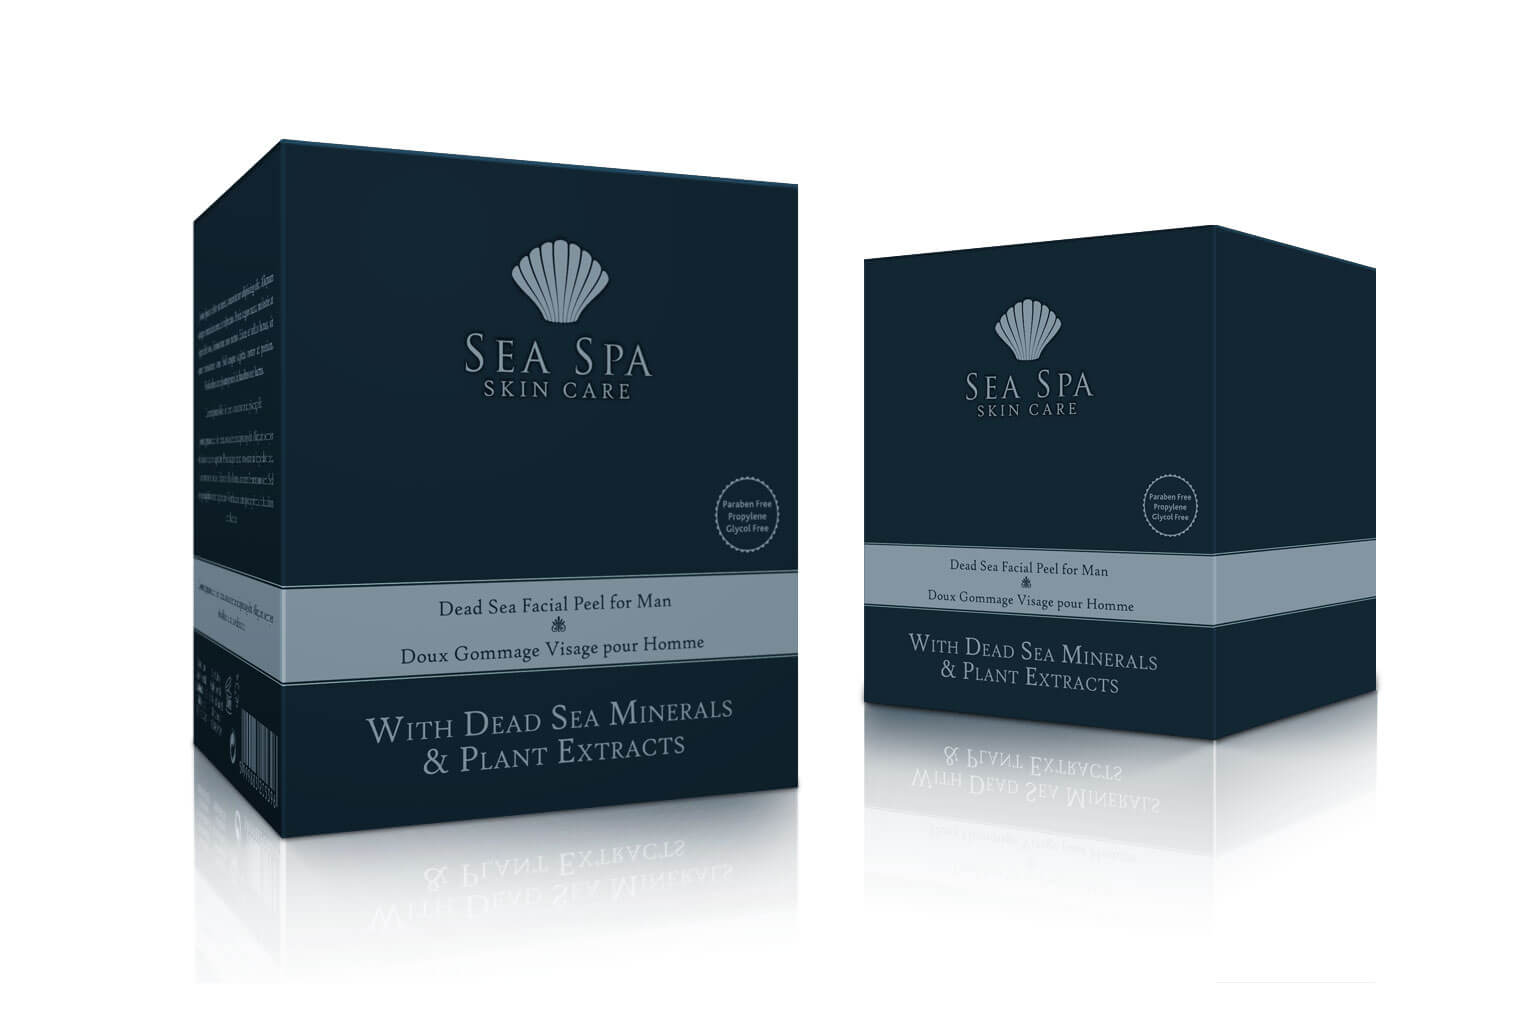 Sea Spa product brand is a high-end quality skincare product. The main ingredients are the Dead Sea minerals. The packaging design has a clean elegant style